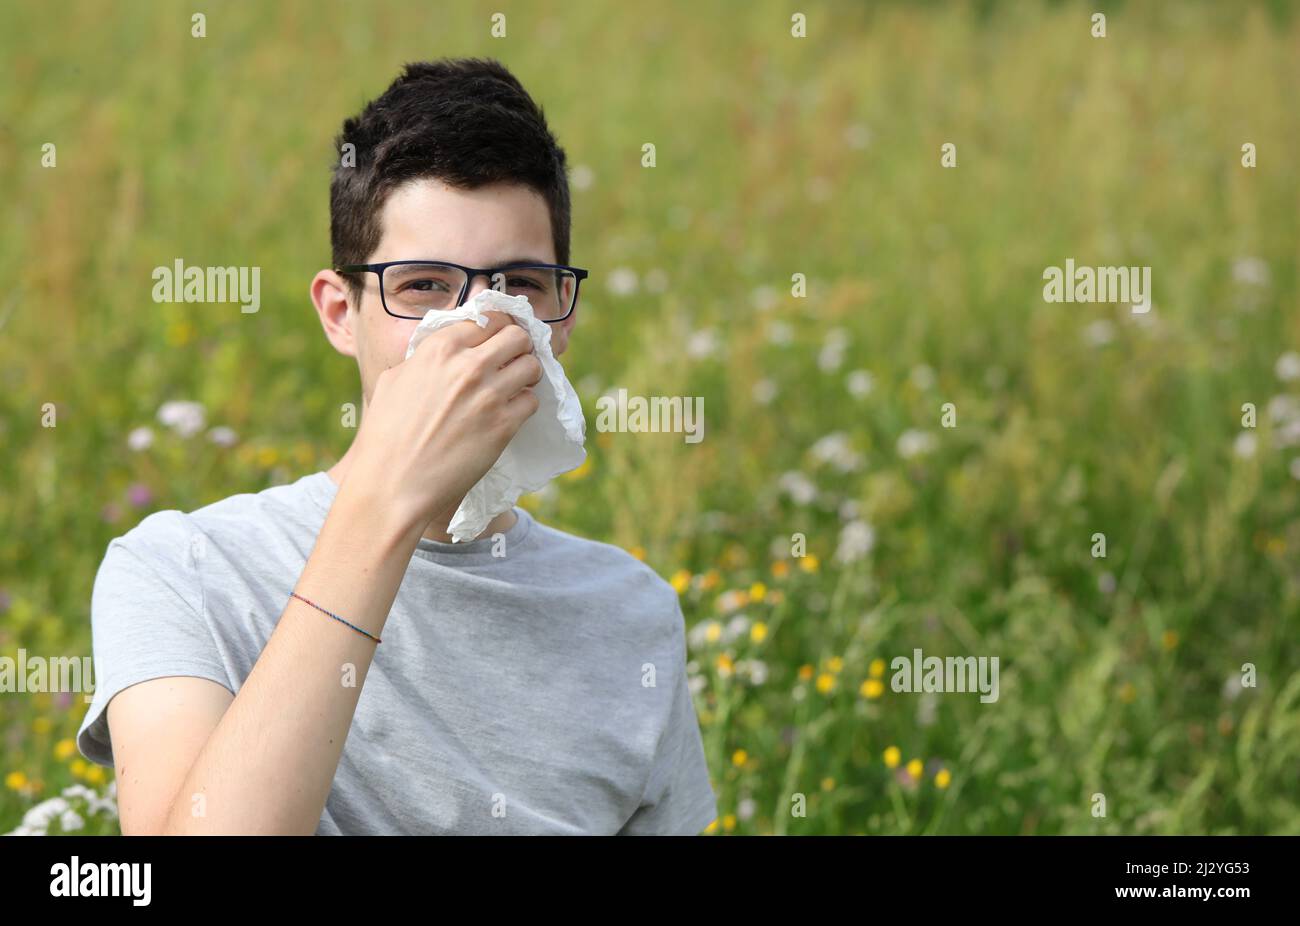 allergic boy with glasses sneezing on a white handkerchief outdoors because he has pollen allergy Stock Photo